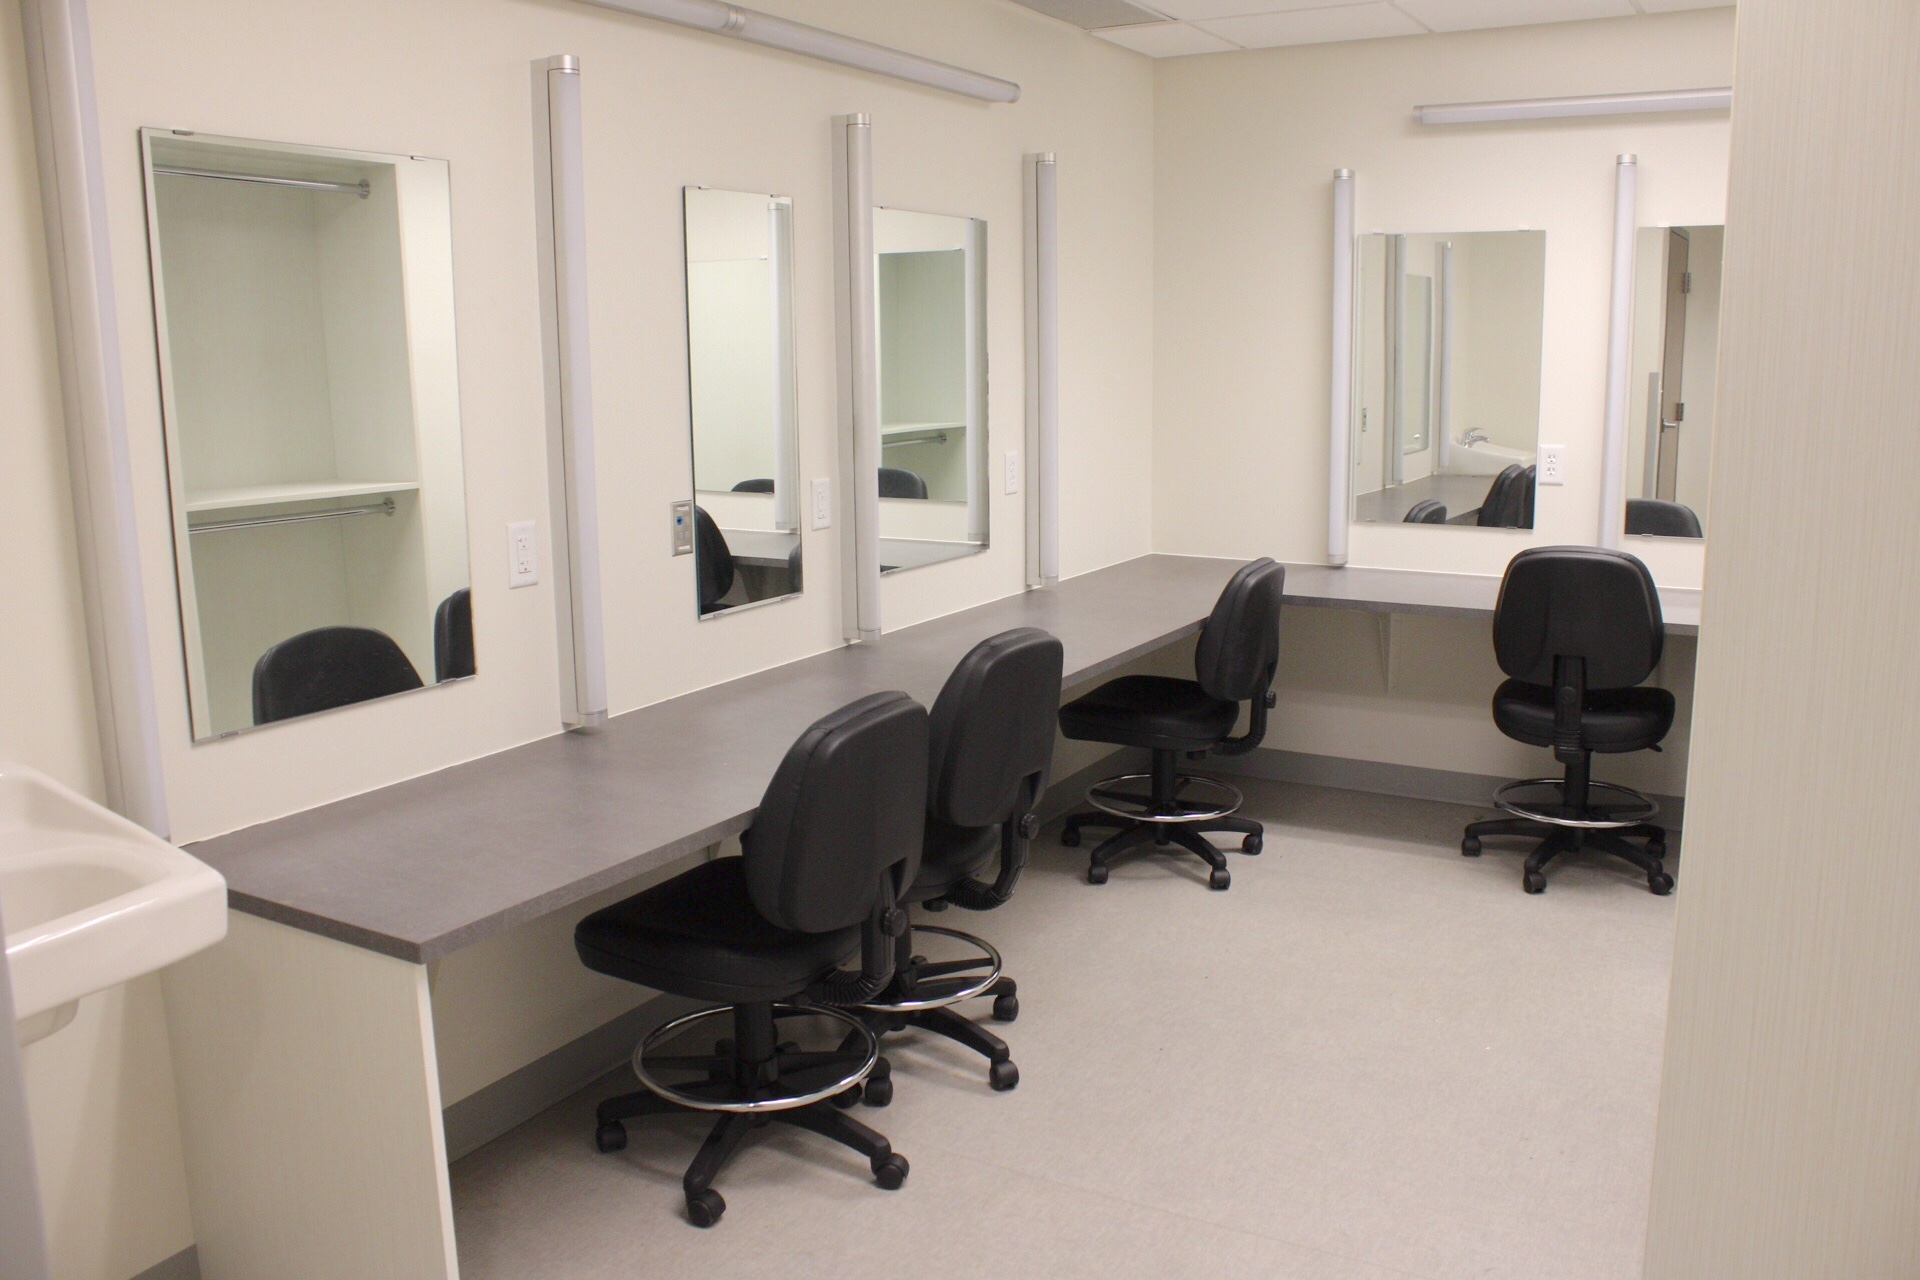 Dressing room with chairs, lights and mirrors.